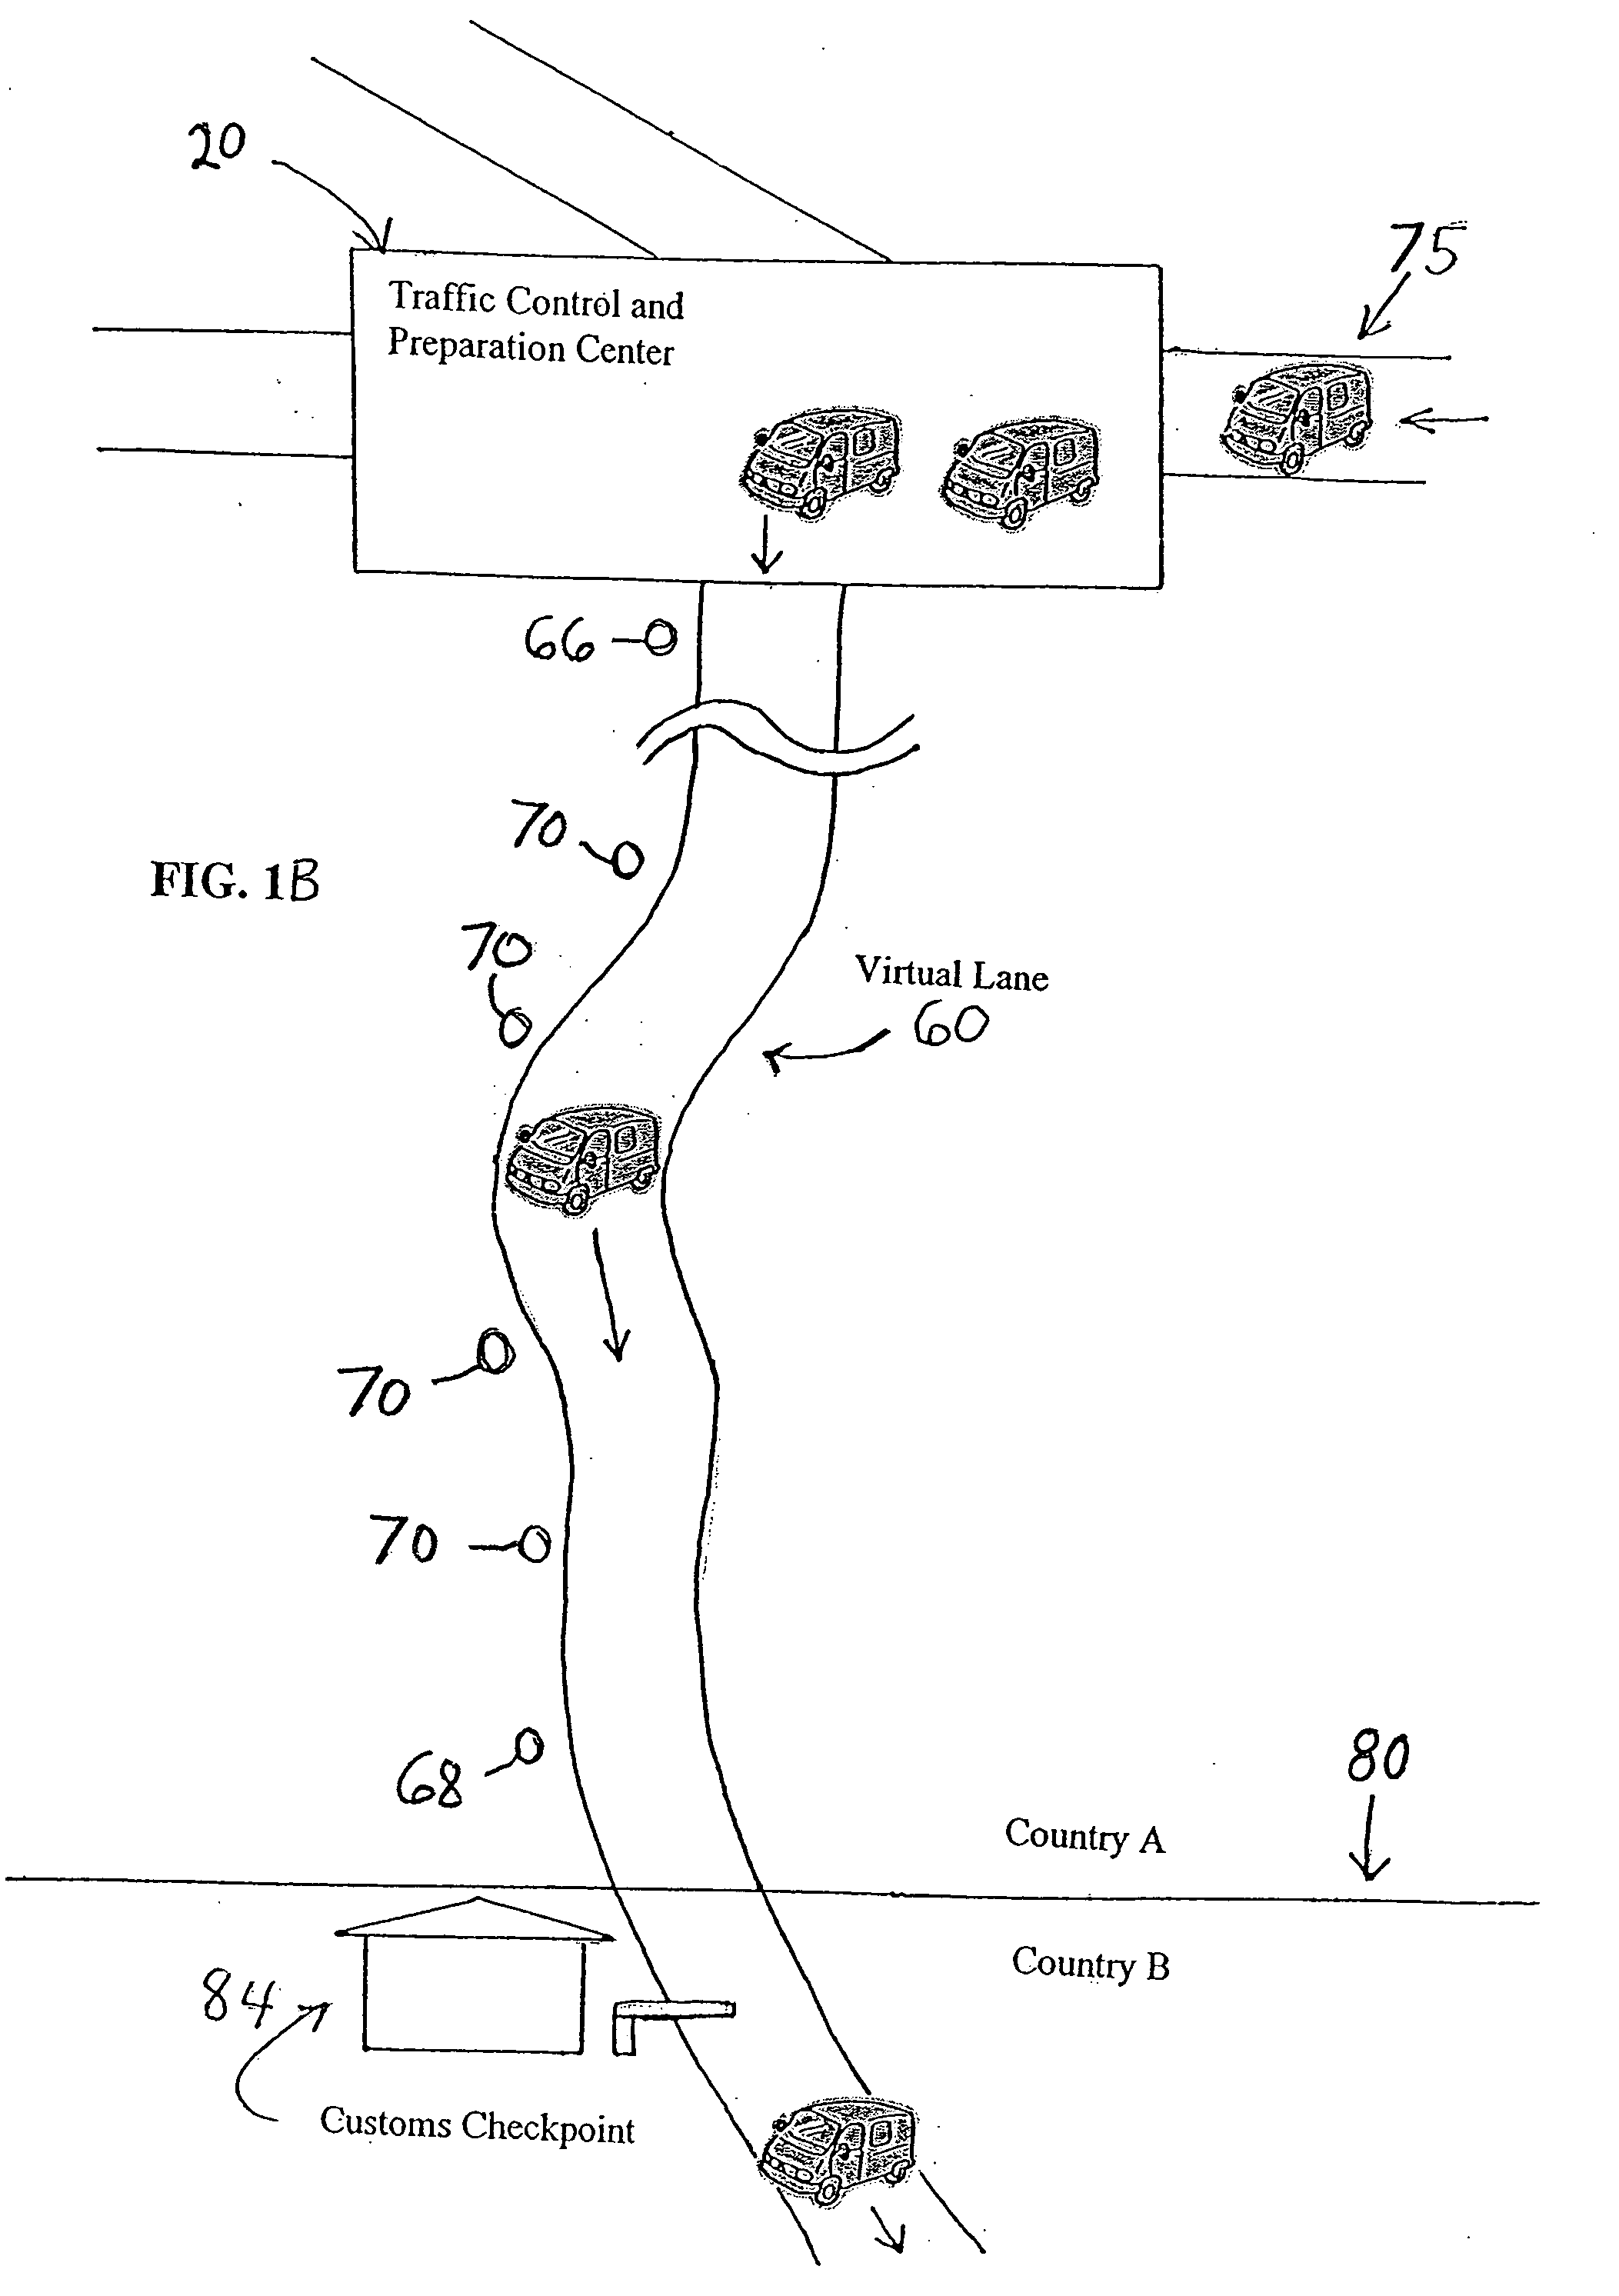 Traffic control system and method for use in international border zones